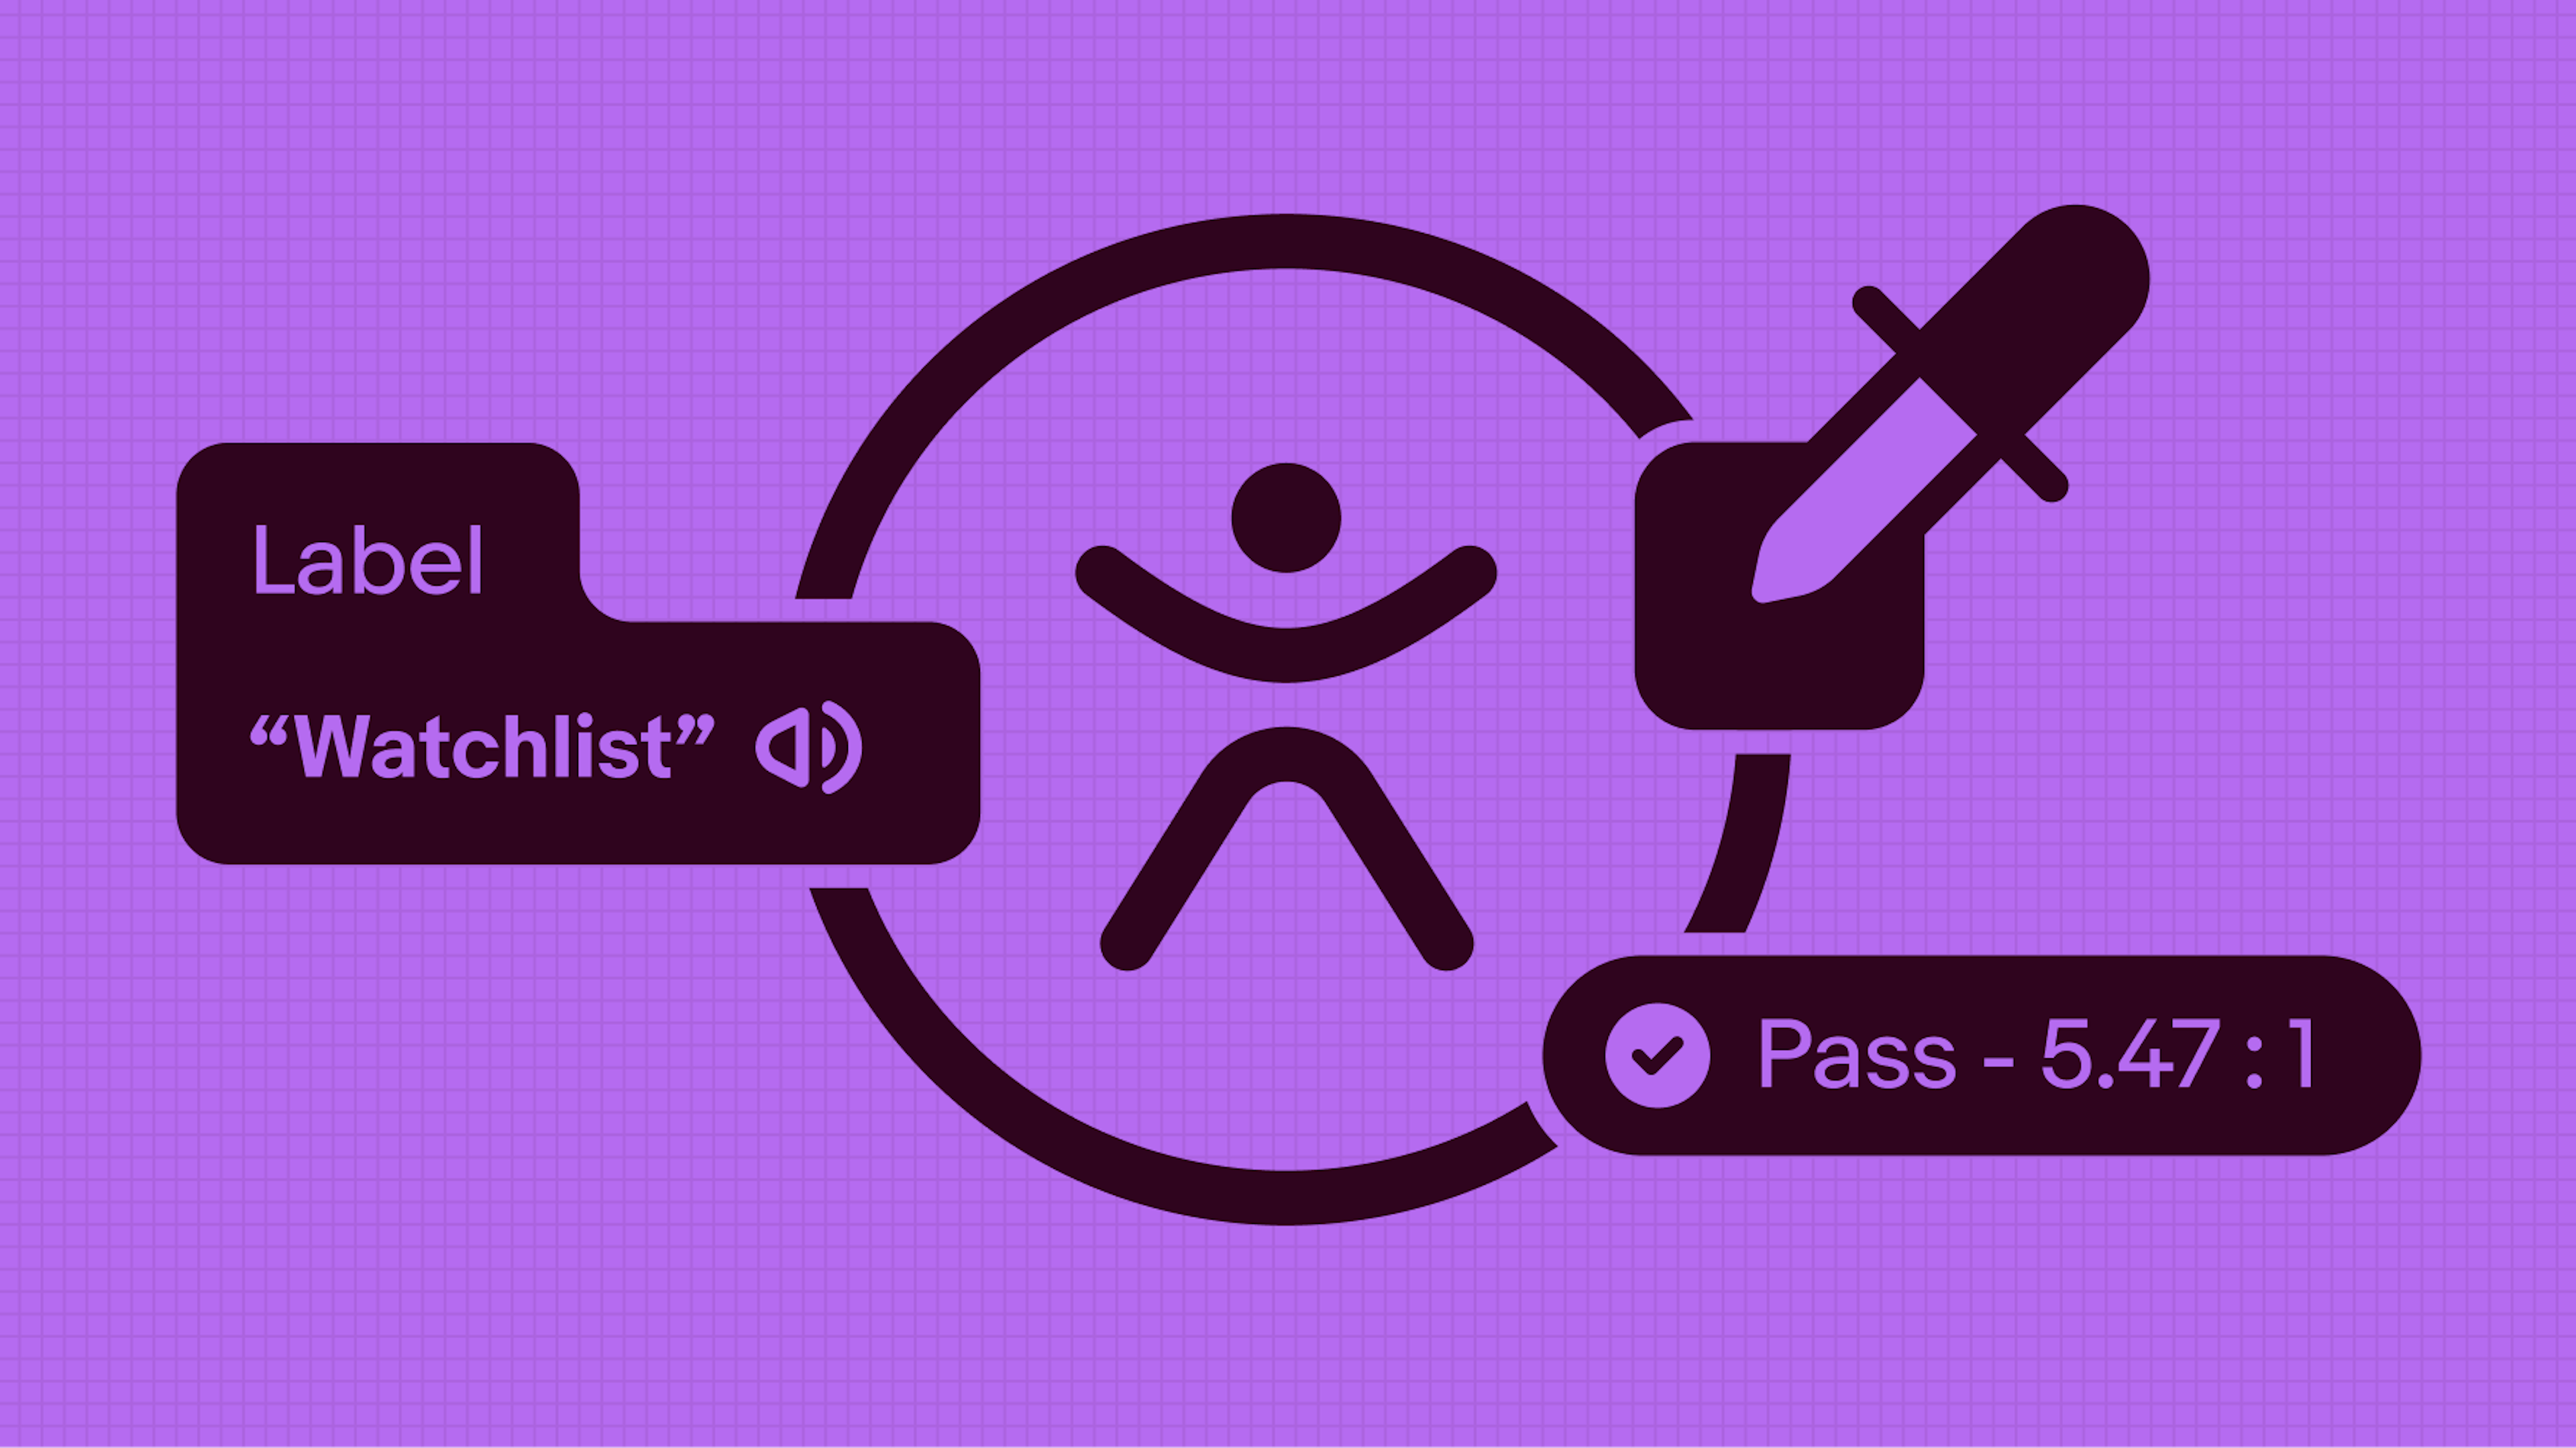 Universal access icon with examples of accessibility tools overlaid on top of it: a label reading out "Watchlist" to assistive technology, a color picker tool verifying that the icon's dark purple has a passing contrast ratio of 5.47:1 with its light purple background